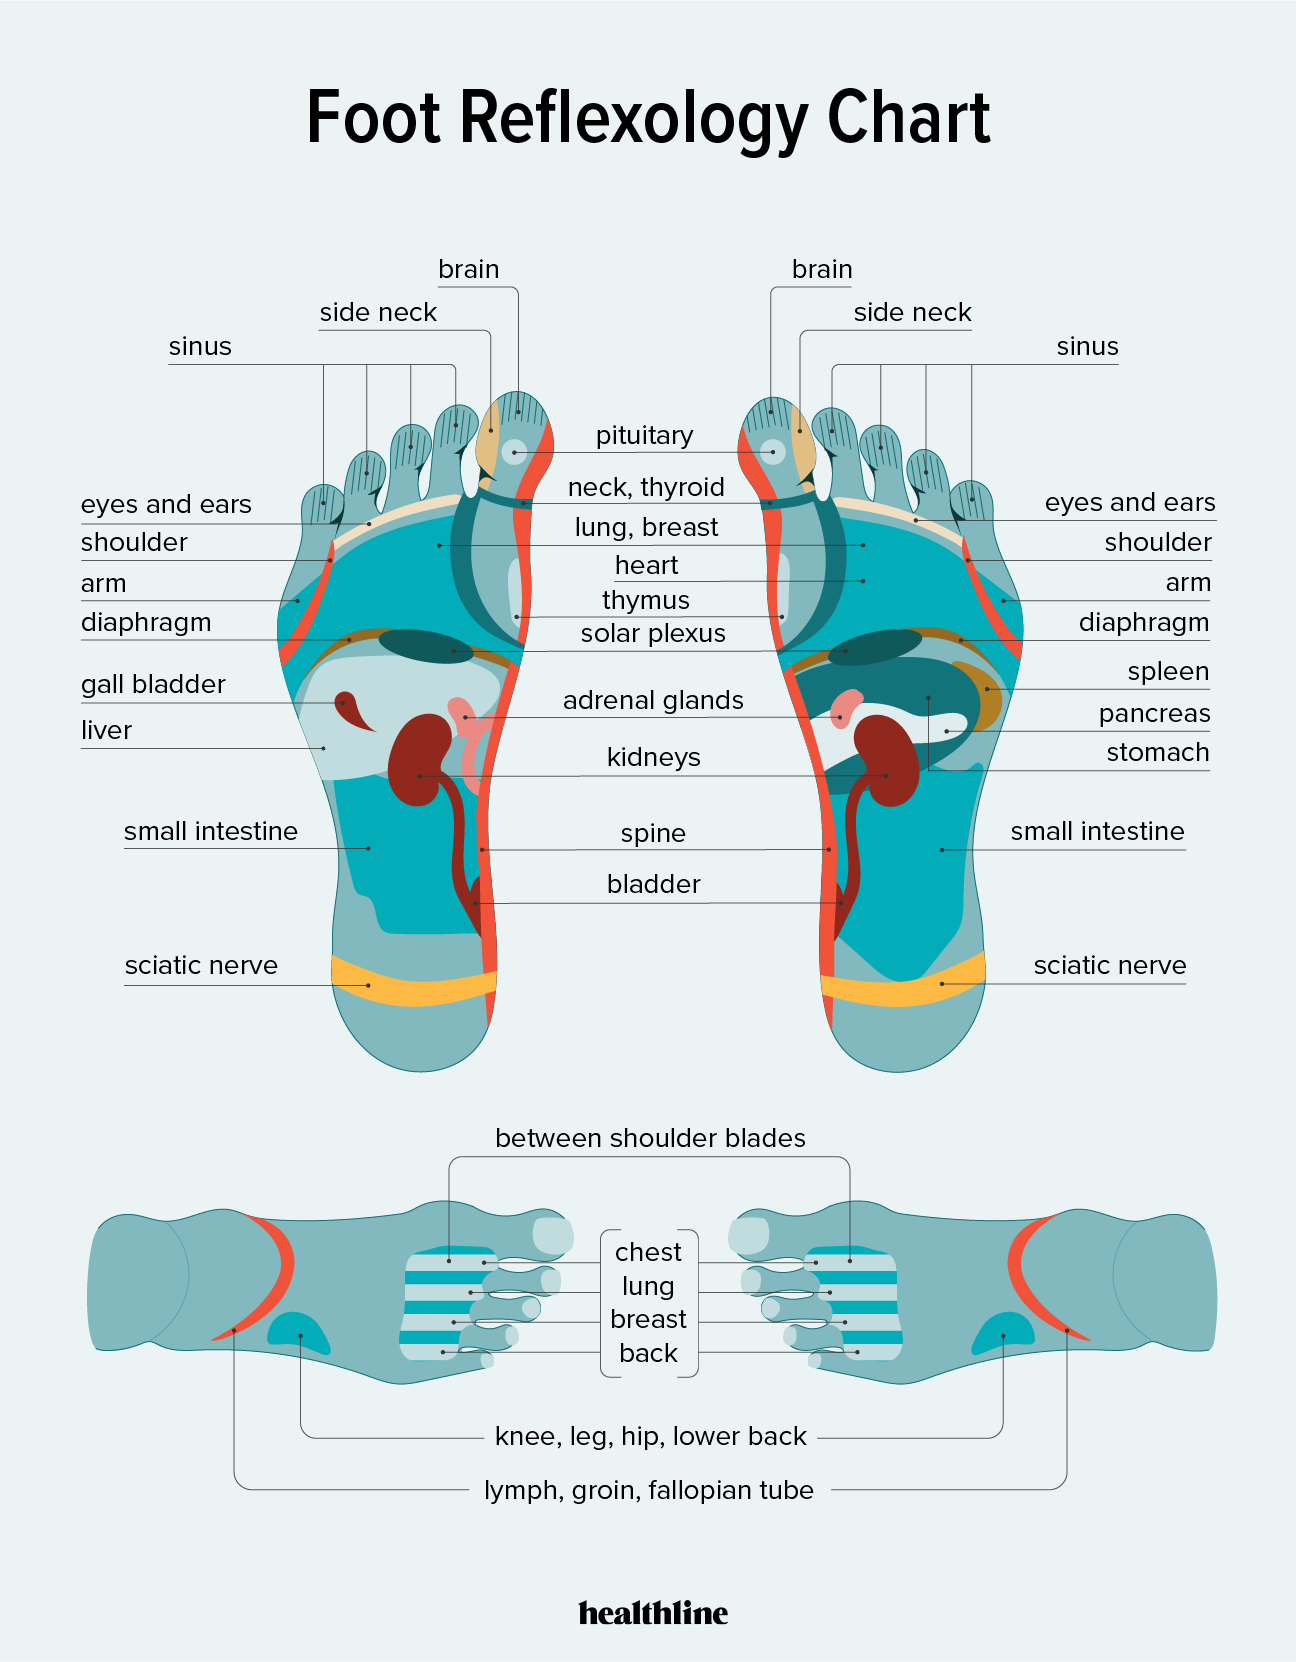 Foot Reflexology Chart Points How To Benefits And Risks 